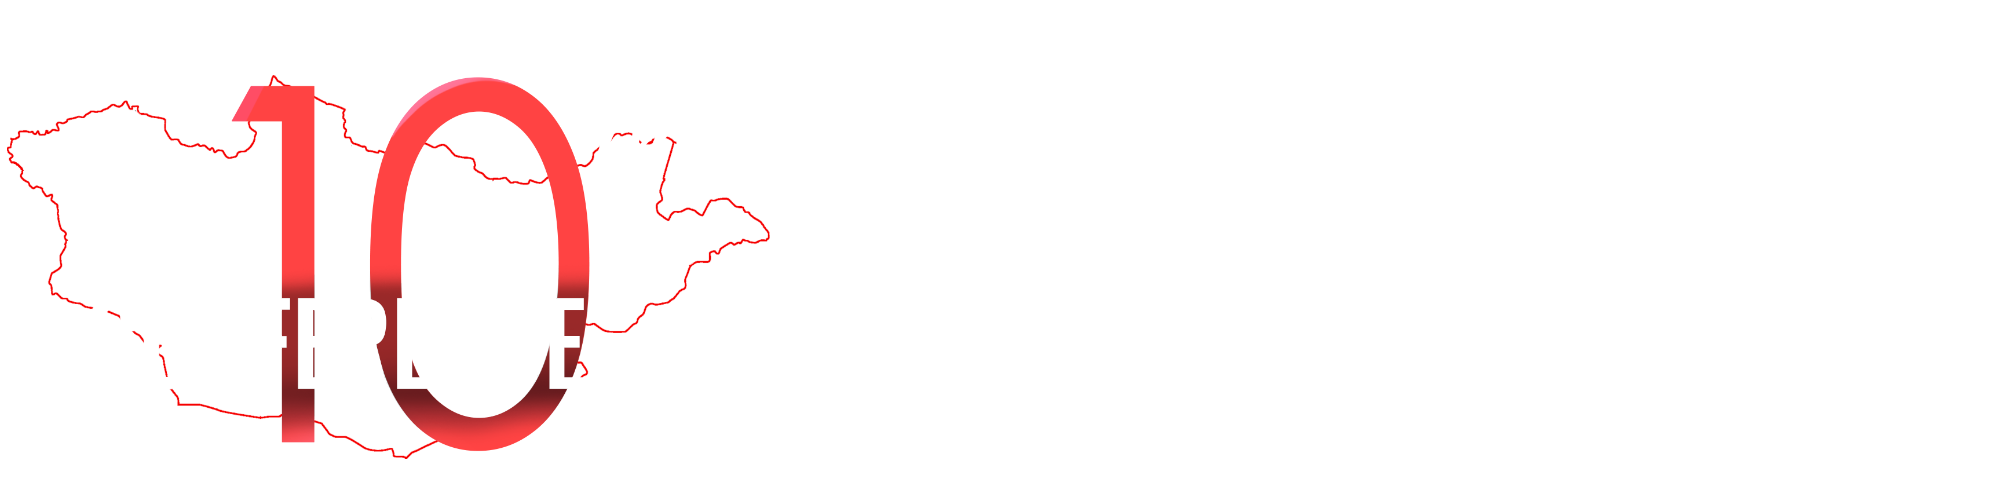 The 10th Conference of the Asian Concrete Federation (ACF)